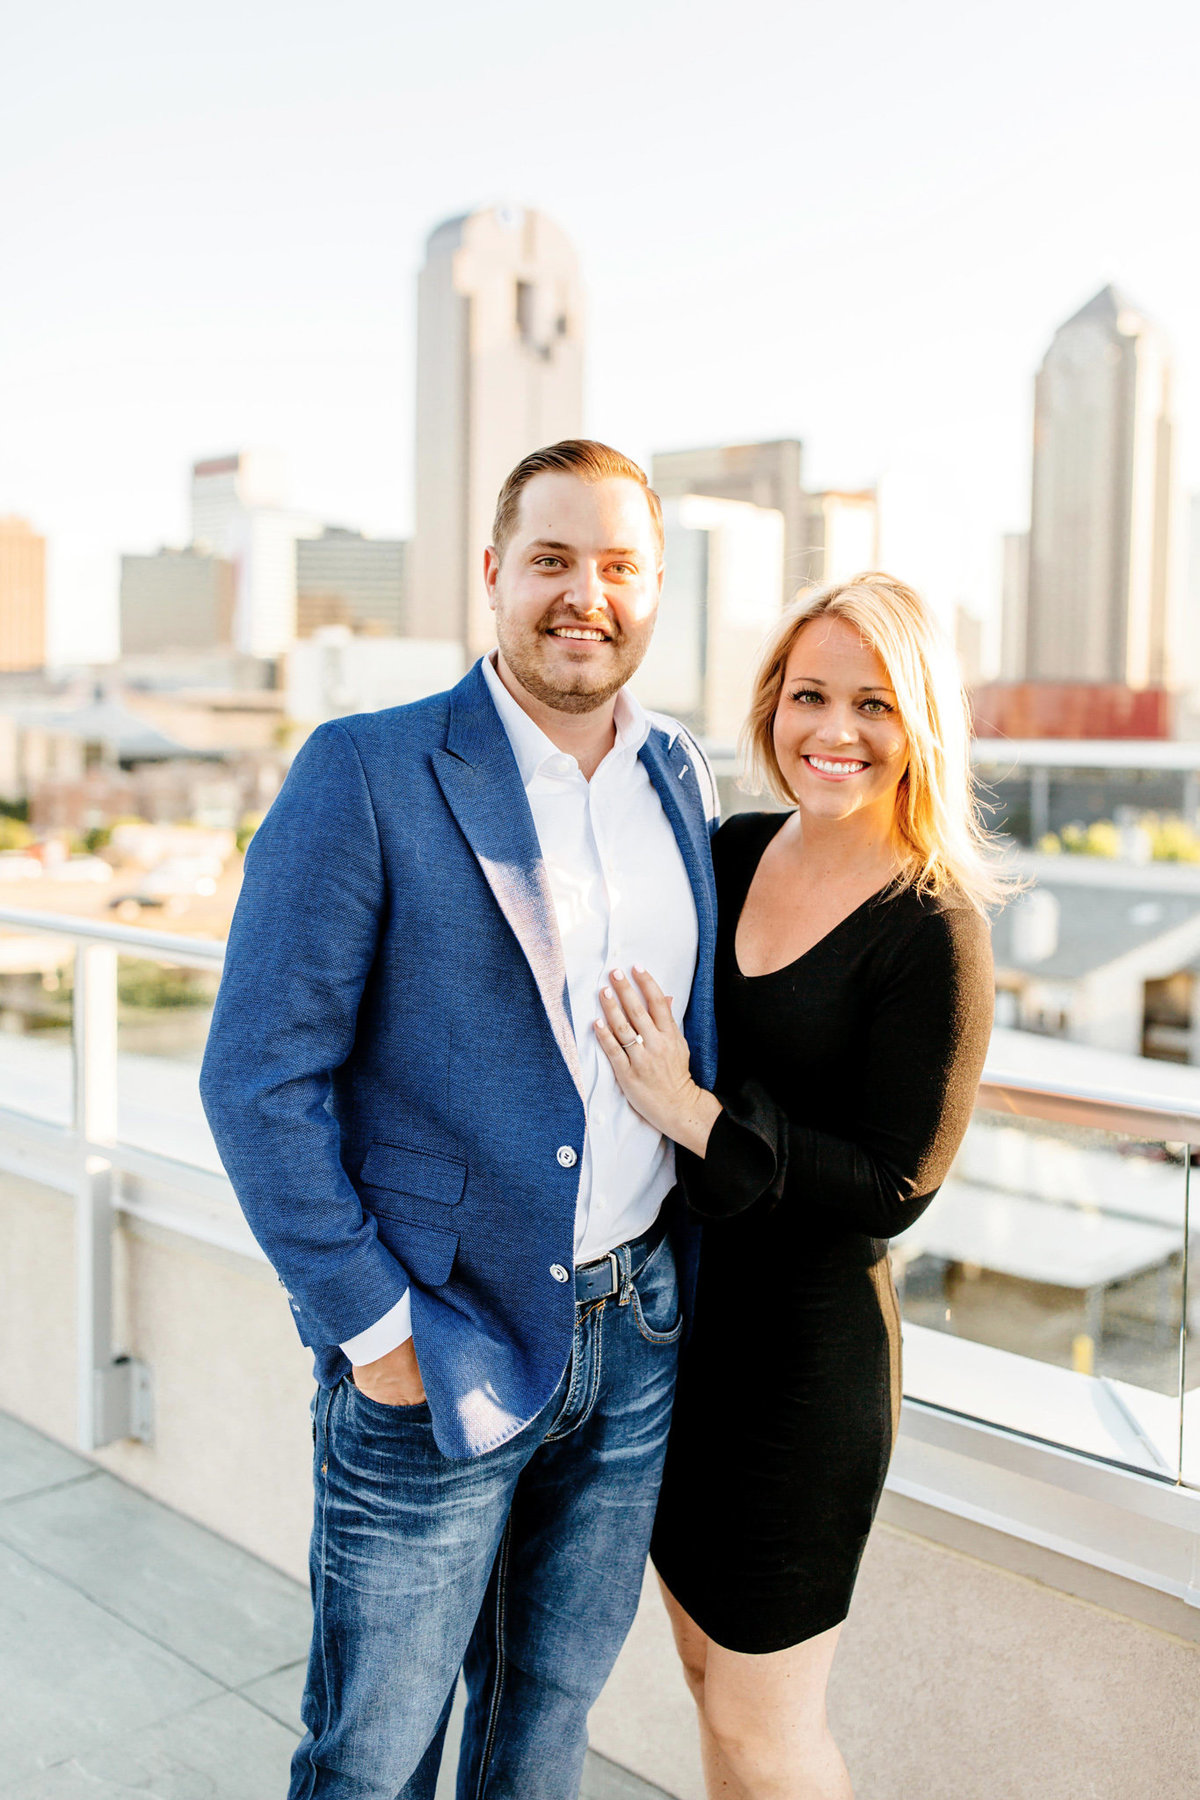 Eric & Megan - Downtown Dallas Rooftop Proposal & Engagement Session-62